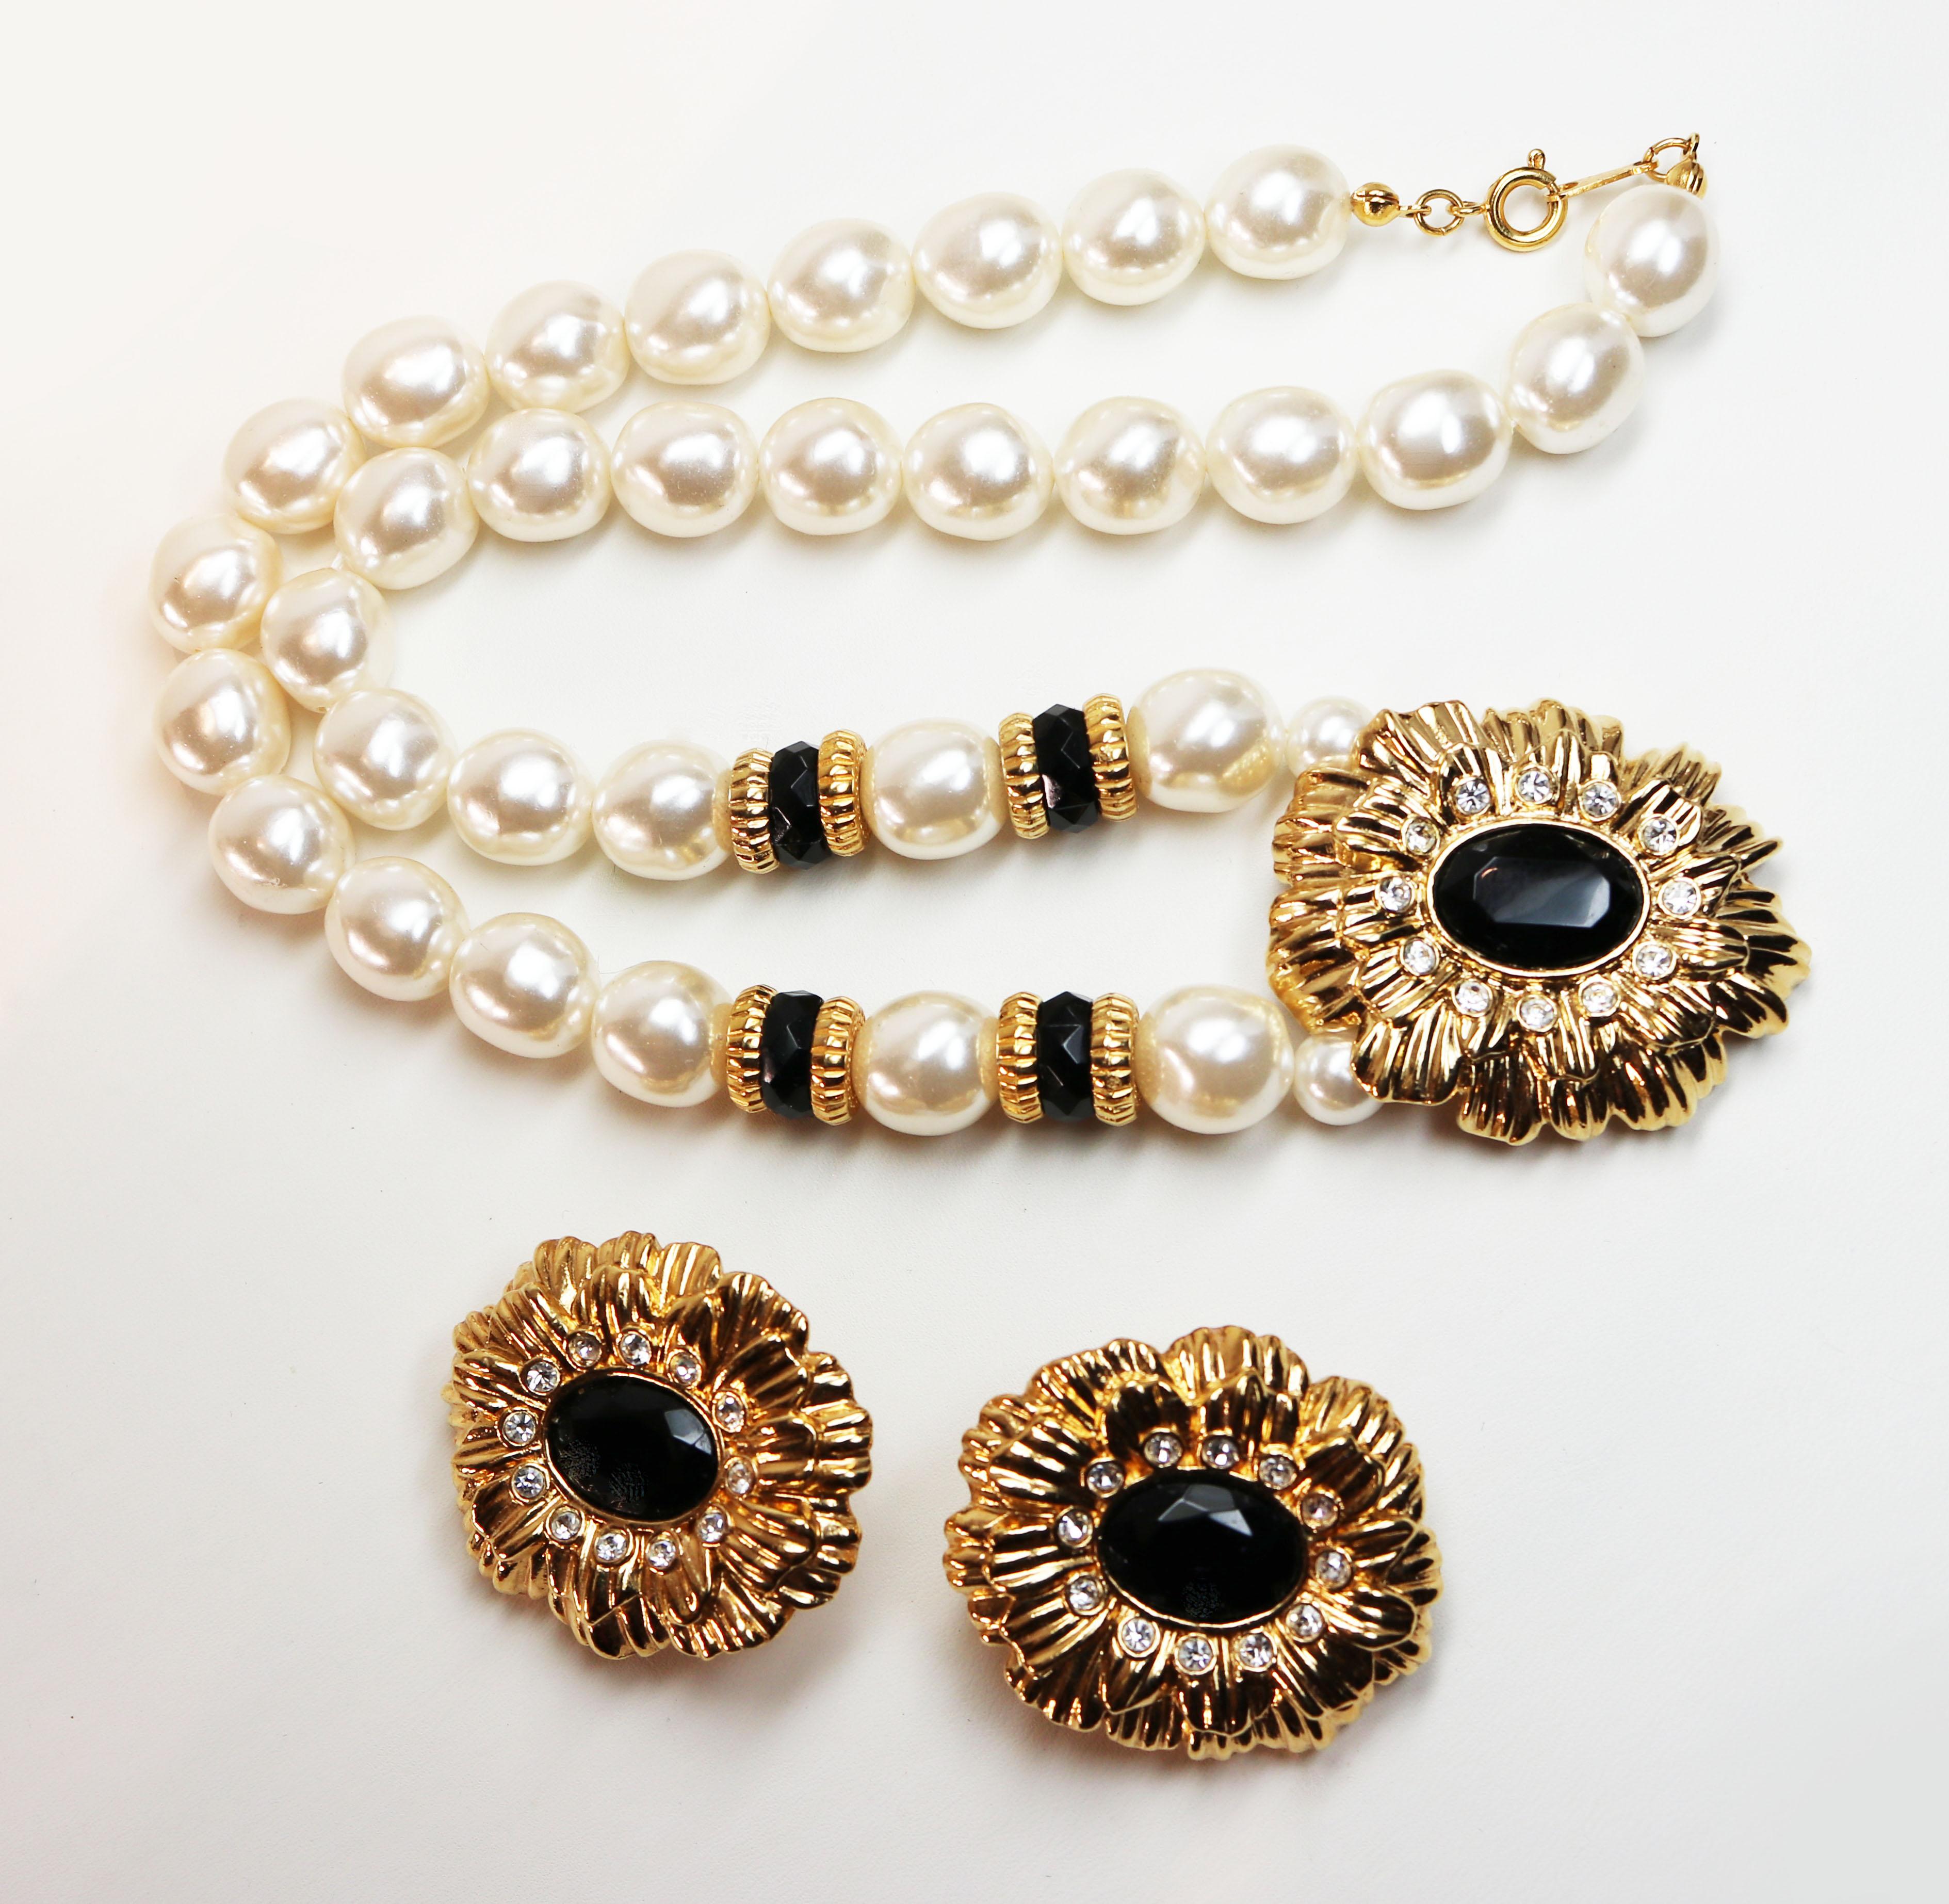 Vintage KENNETH LANE PEARLS *signed* Sunflower Necklace & Clip-on Earrings ~ 22K Gold Plating with Simulated Pearl and Onyx Demi Parure
The necklace and earrings are 22K gold plated and are signed K.J.L. for AVON. The necklace is 21